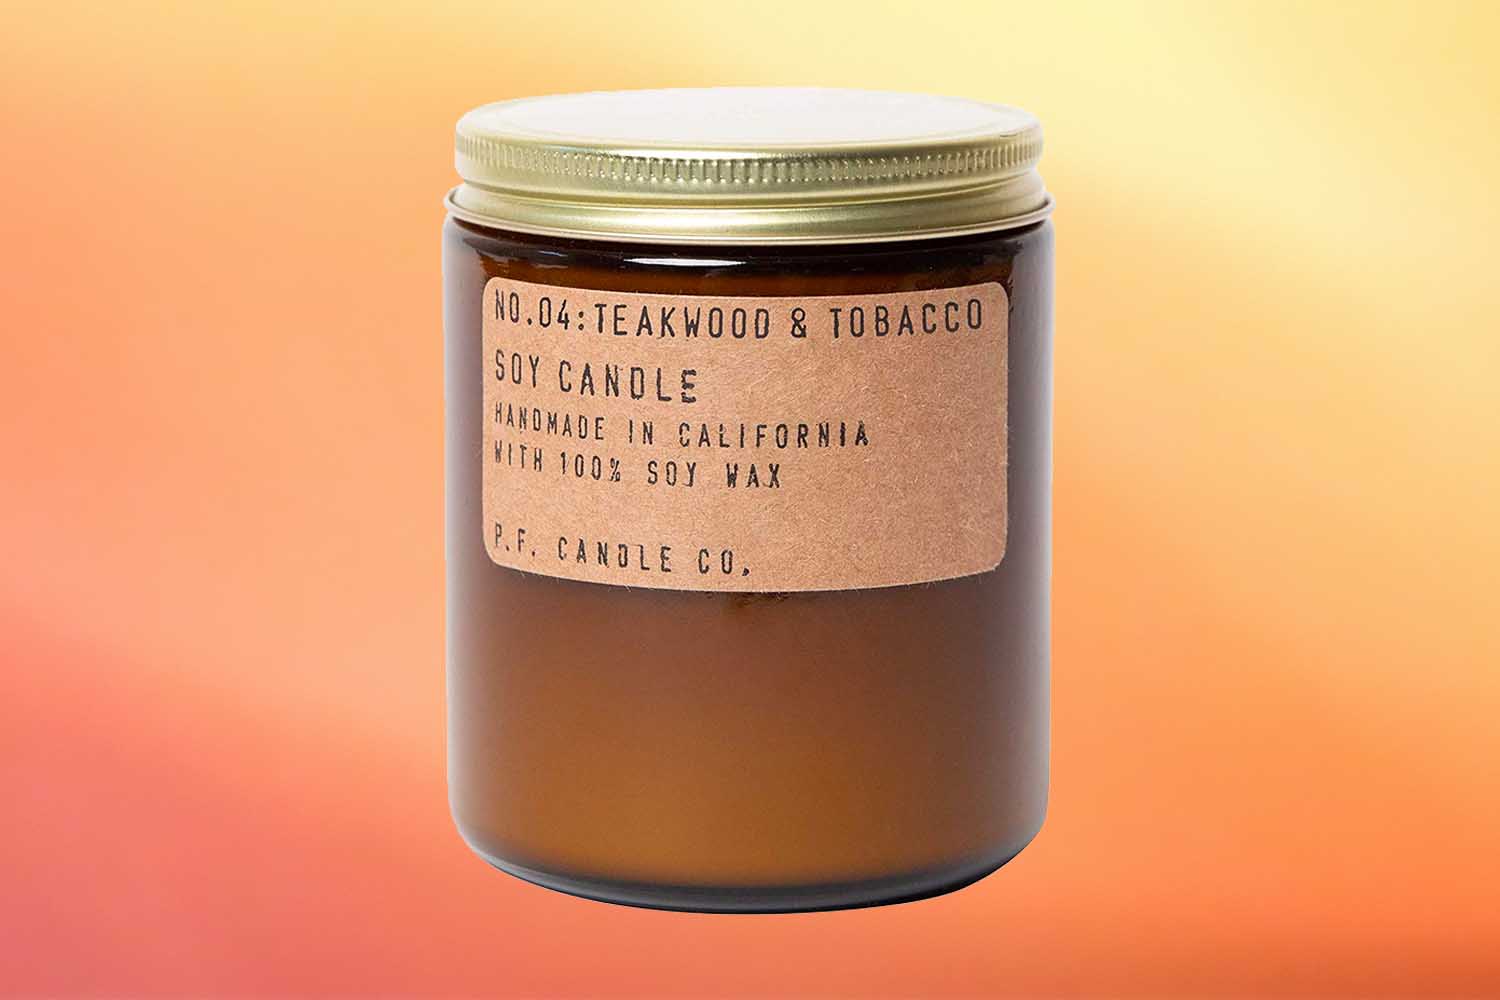 P.F. Candle Co. Teakwood and Tobacco Candlene of the best fall candles for 2022 on an orange background